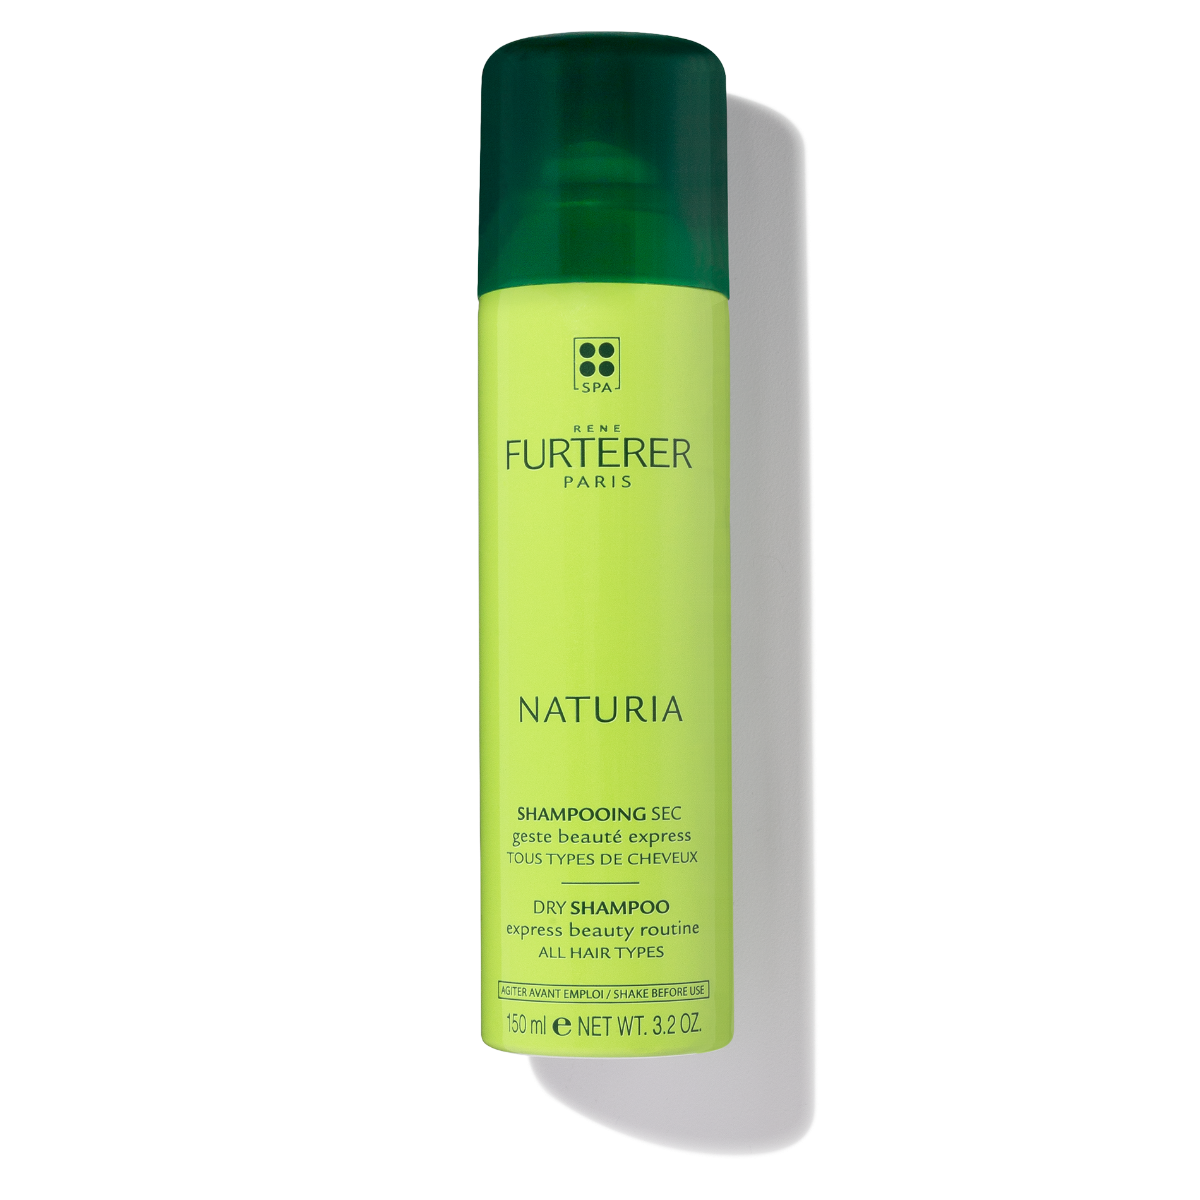 Rene Furterer NATURIA Dry Shampoo, Oil-Absorbing, Clay, Beige Tint, Lightly Scented 1.6 Ounce (Pack of 1)